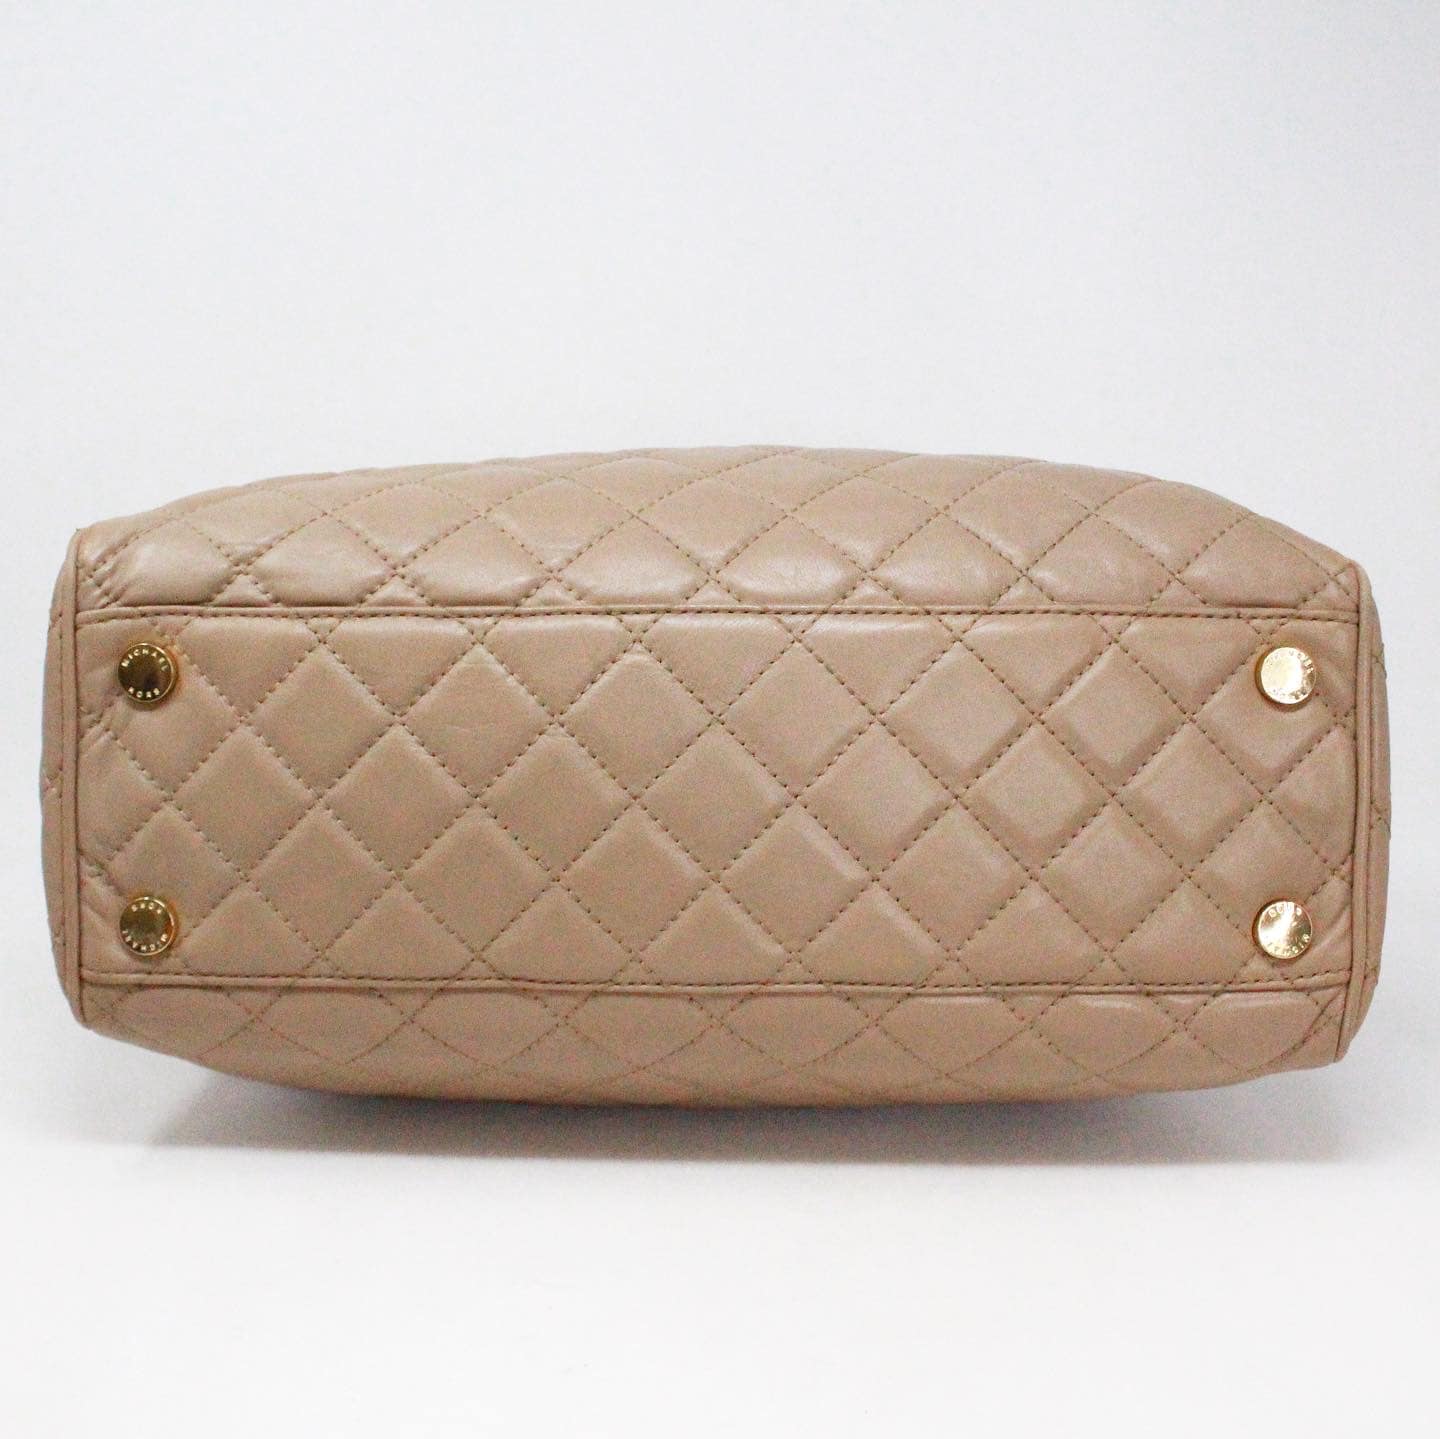 ON SALE* MICHAEL KORS #38459 Taupe Quilted Chain Shoulder Bag – ALL YOUR  BLISS